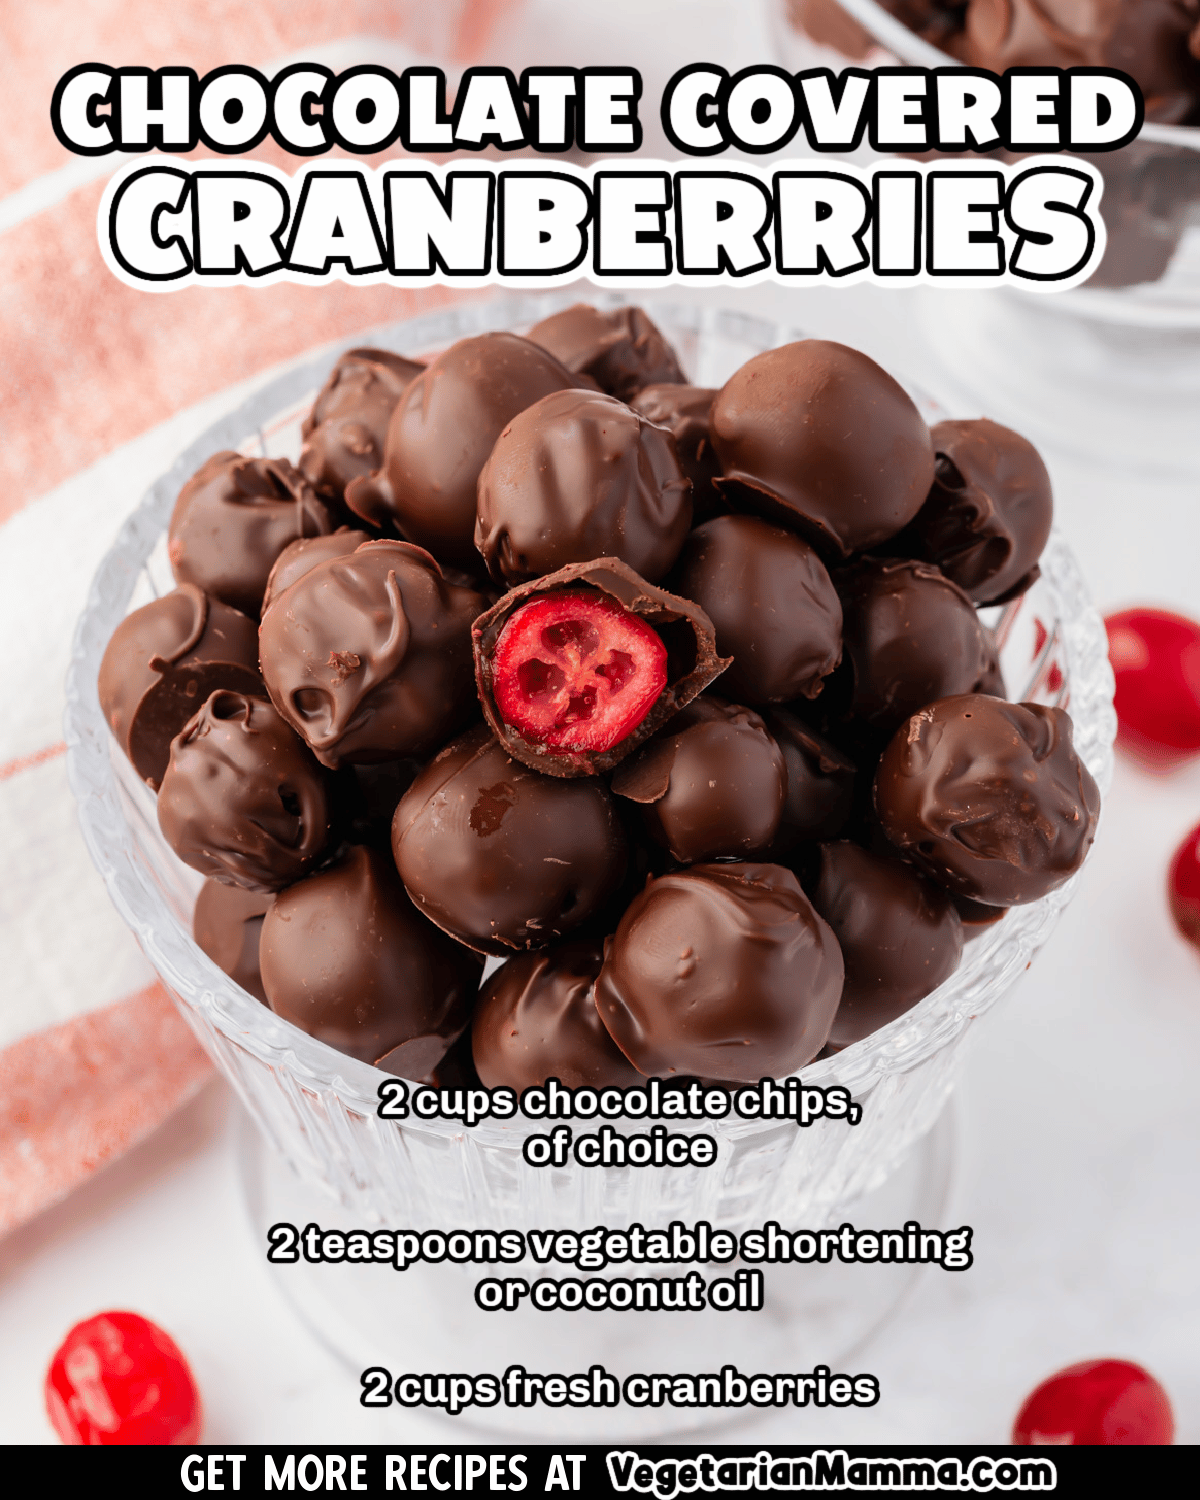 Chocolate Covered Cranberries are the best chocolate-covered berries. They're sweet, tart, and easy to make with just three ingredients.